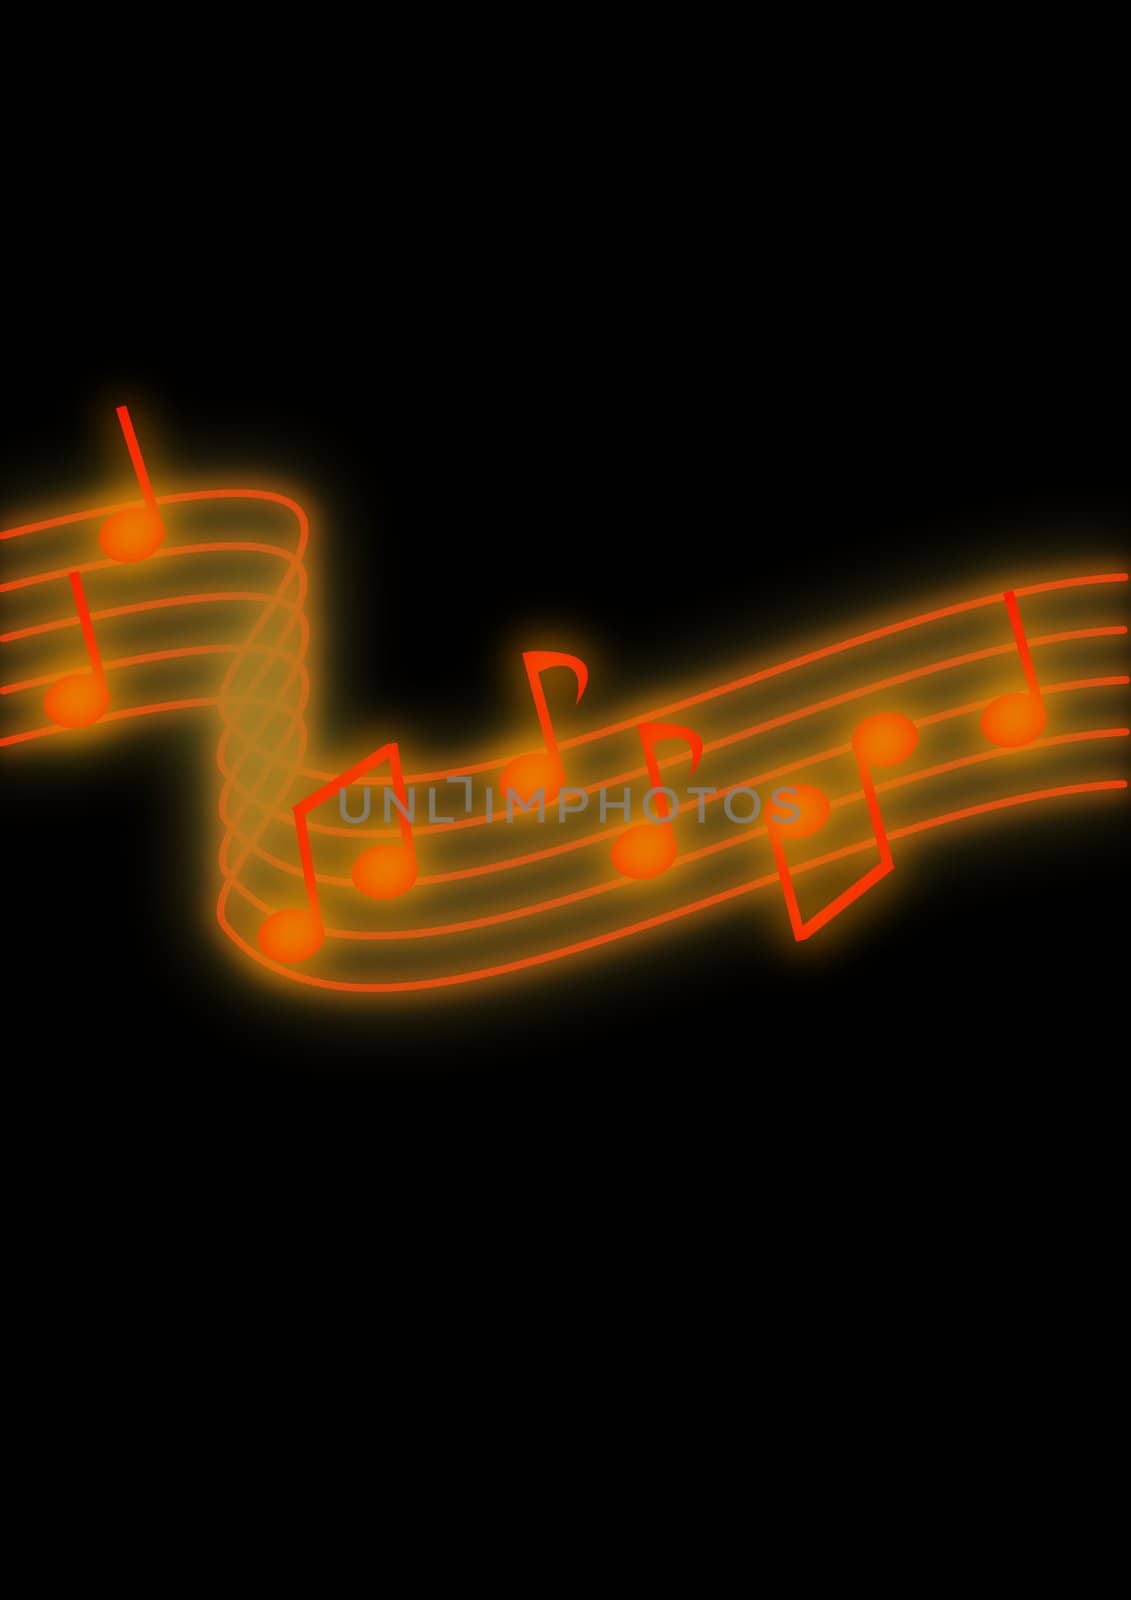 Glowing orange music notes on a black background.